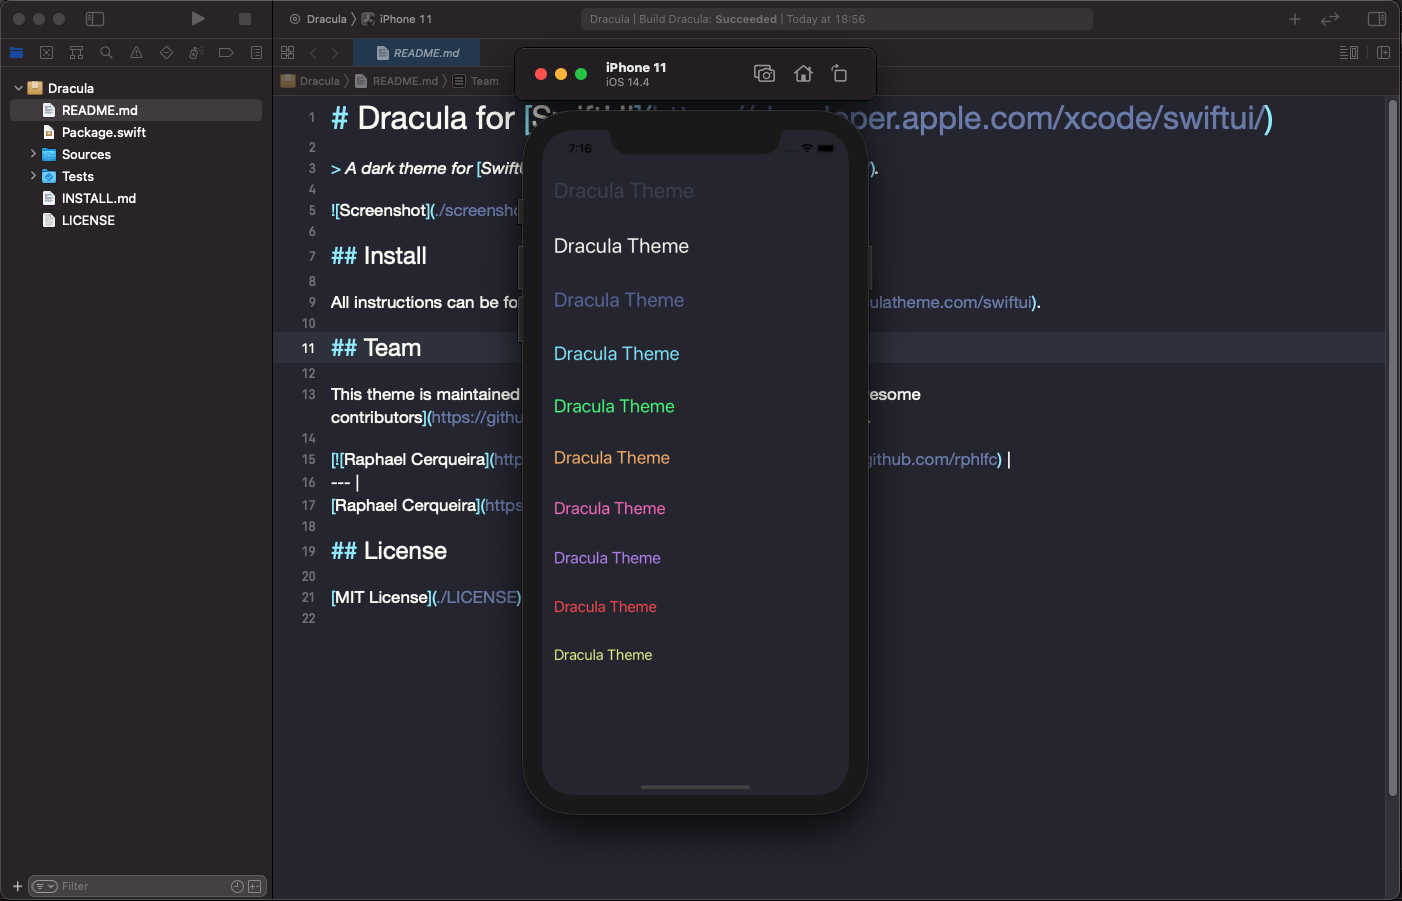 swiftui - Theme Preview